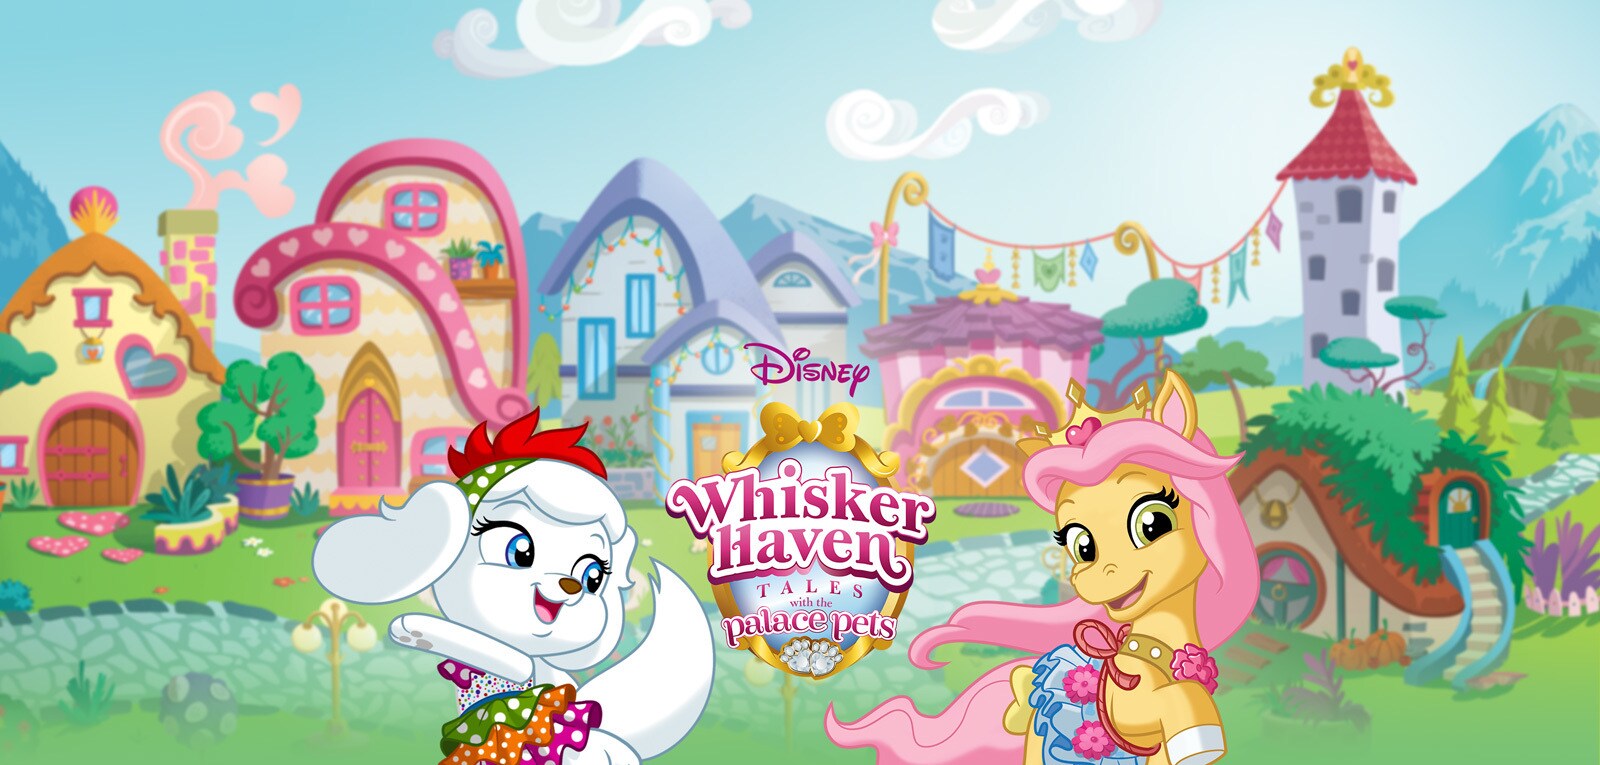 Whisker Haven Tales With The Palace Pets Disney Characters